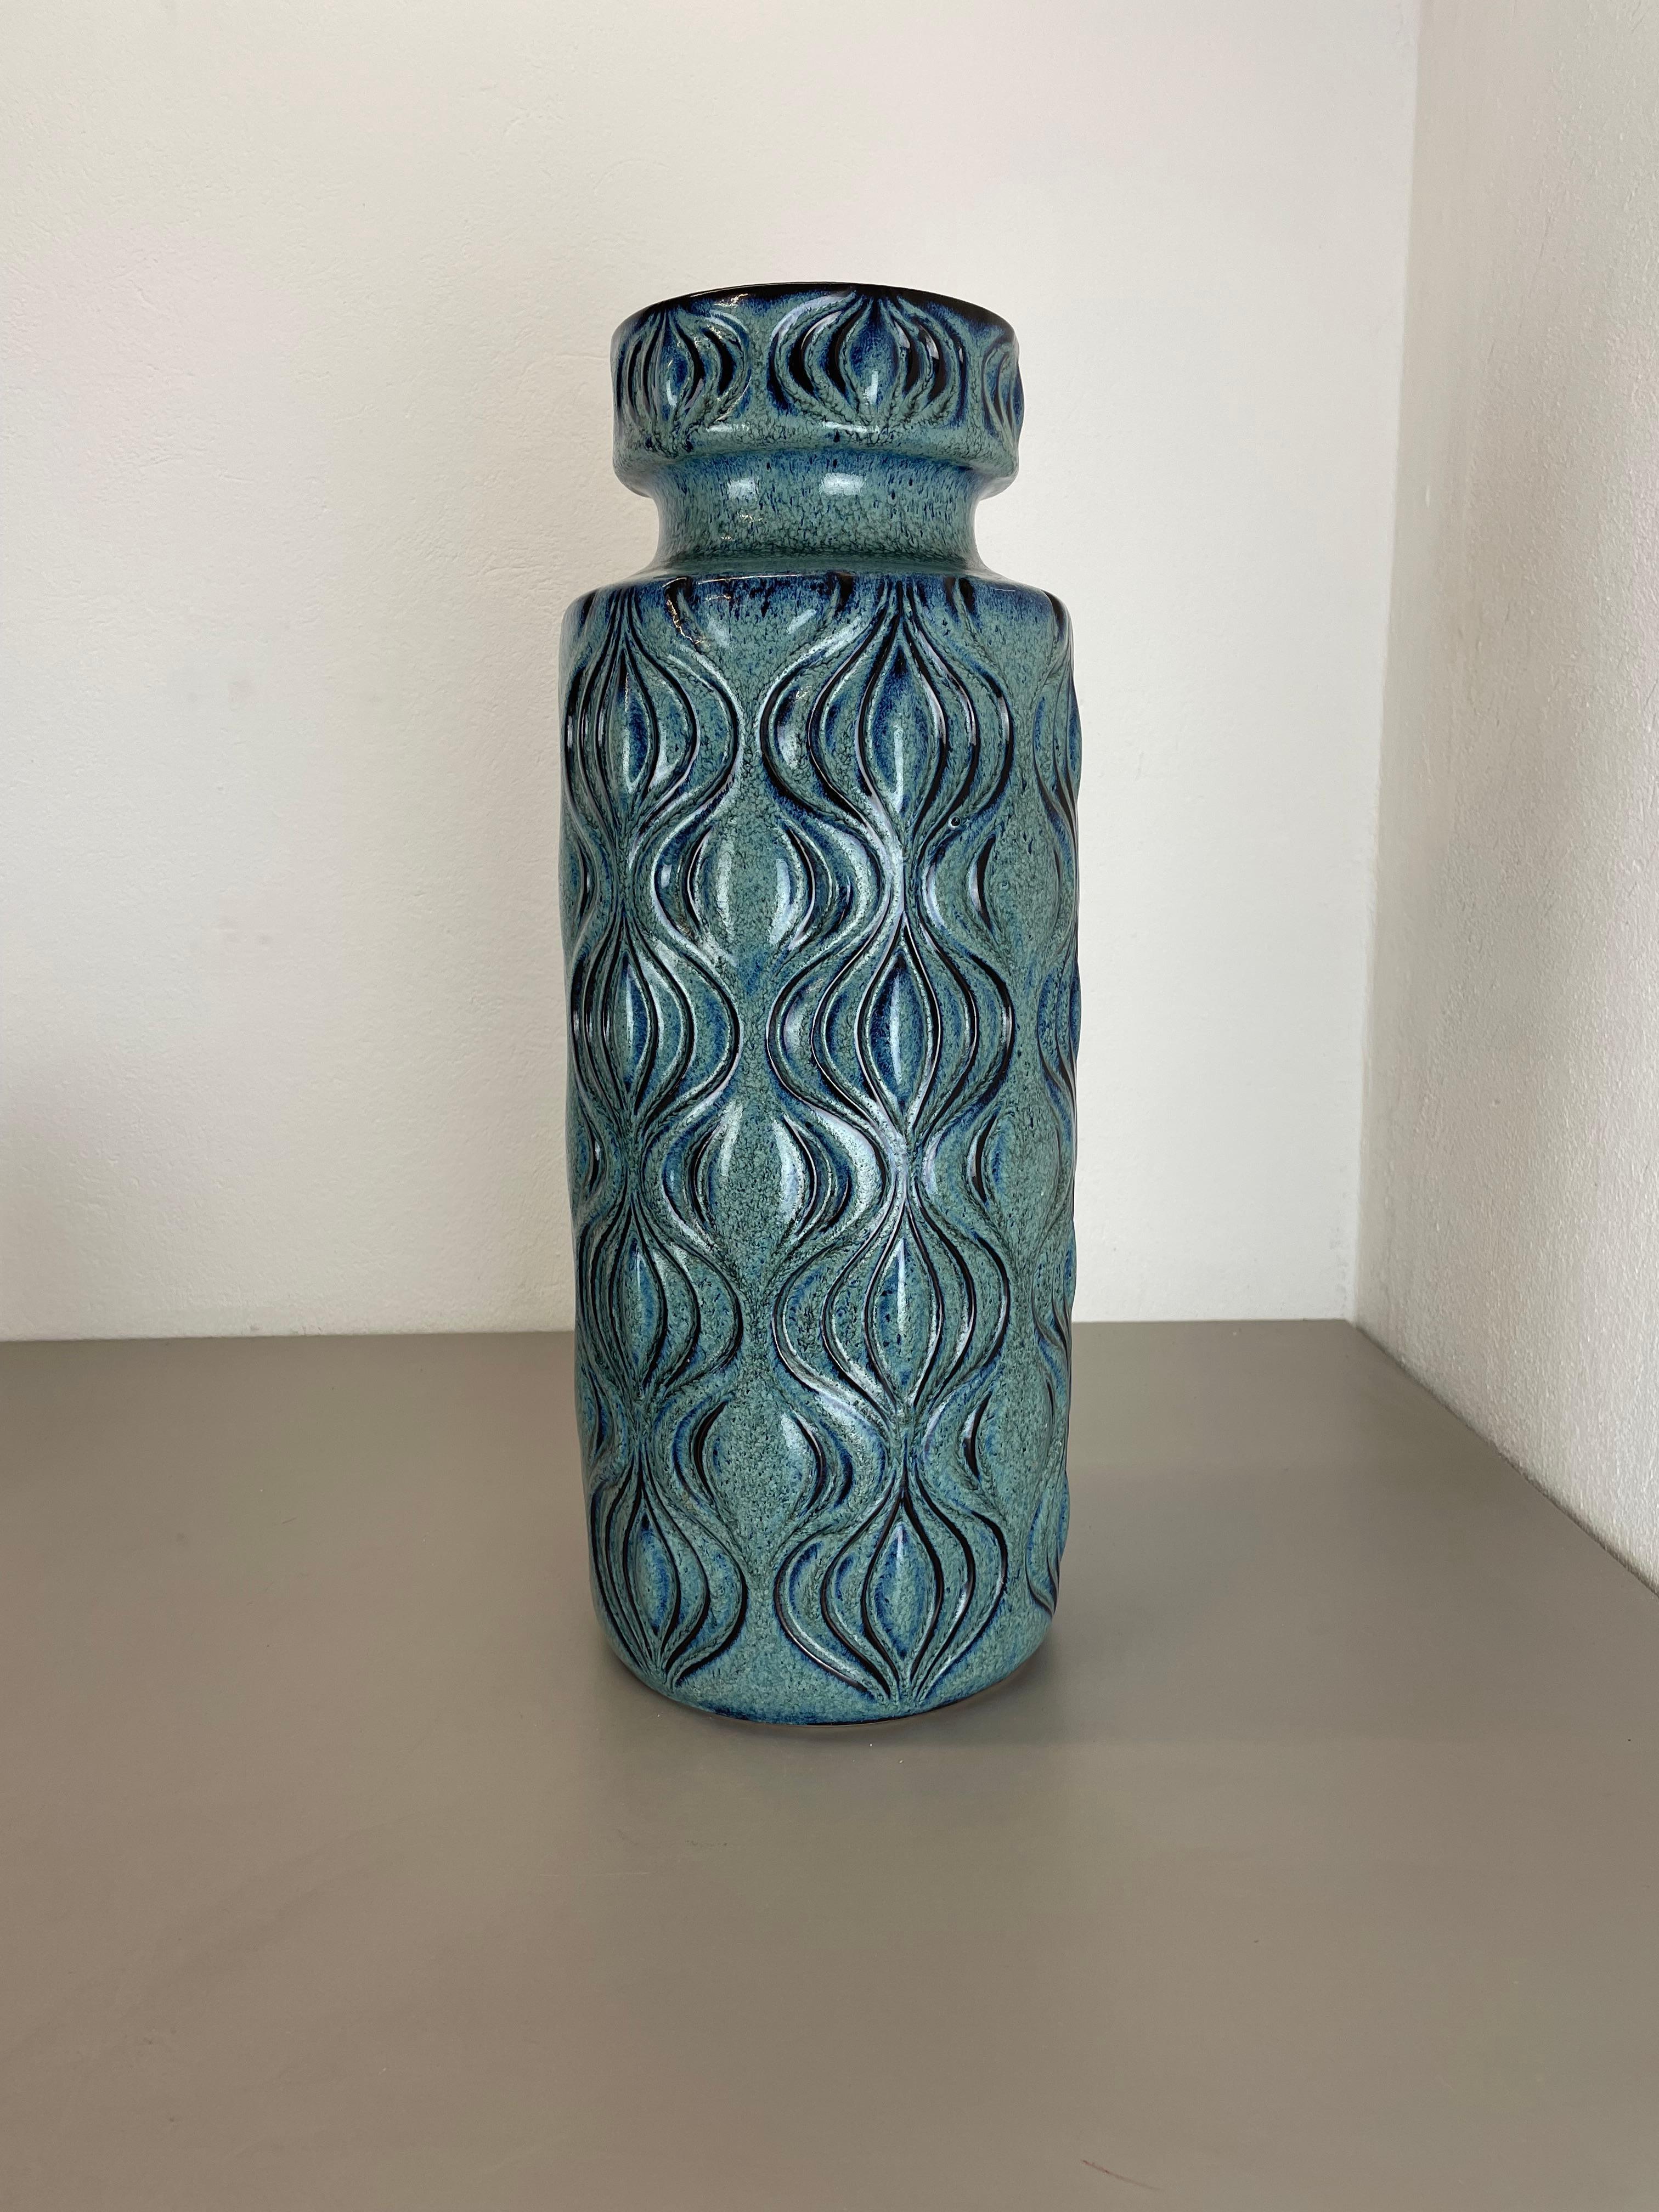 Article:

Fat lava art vase


Producer:

Scheurich, Germany


Design:

ONION Pattern



Decade:

1970s


Description:

This original vintage vase was produced in the 1970s in Germany. It is made of porcelain in fat lava optic. Super rare in this